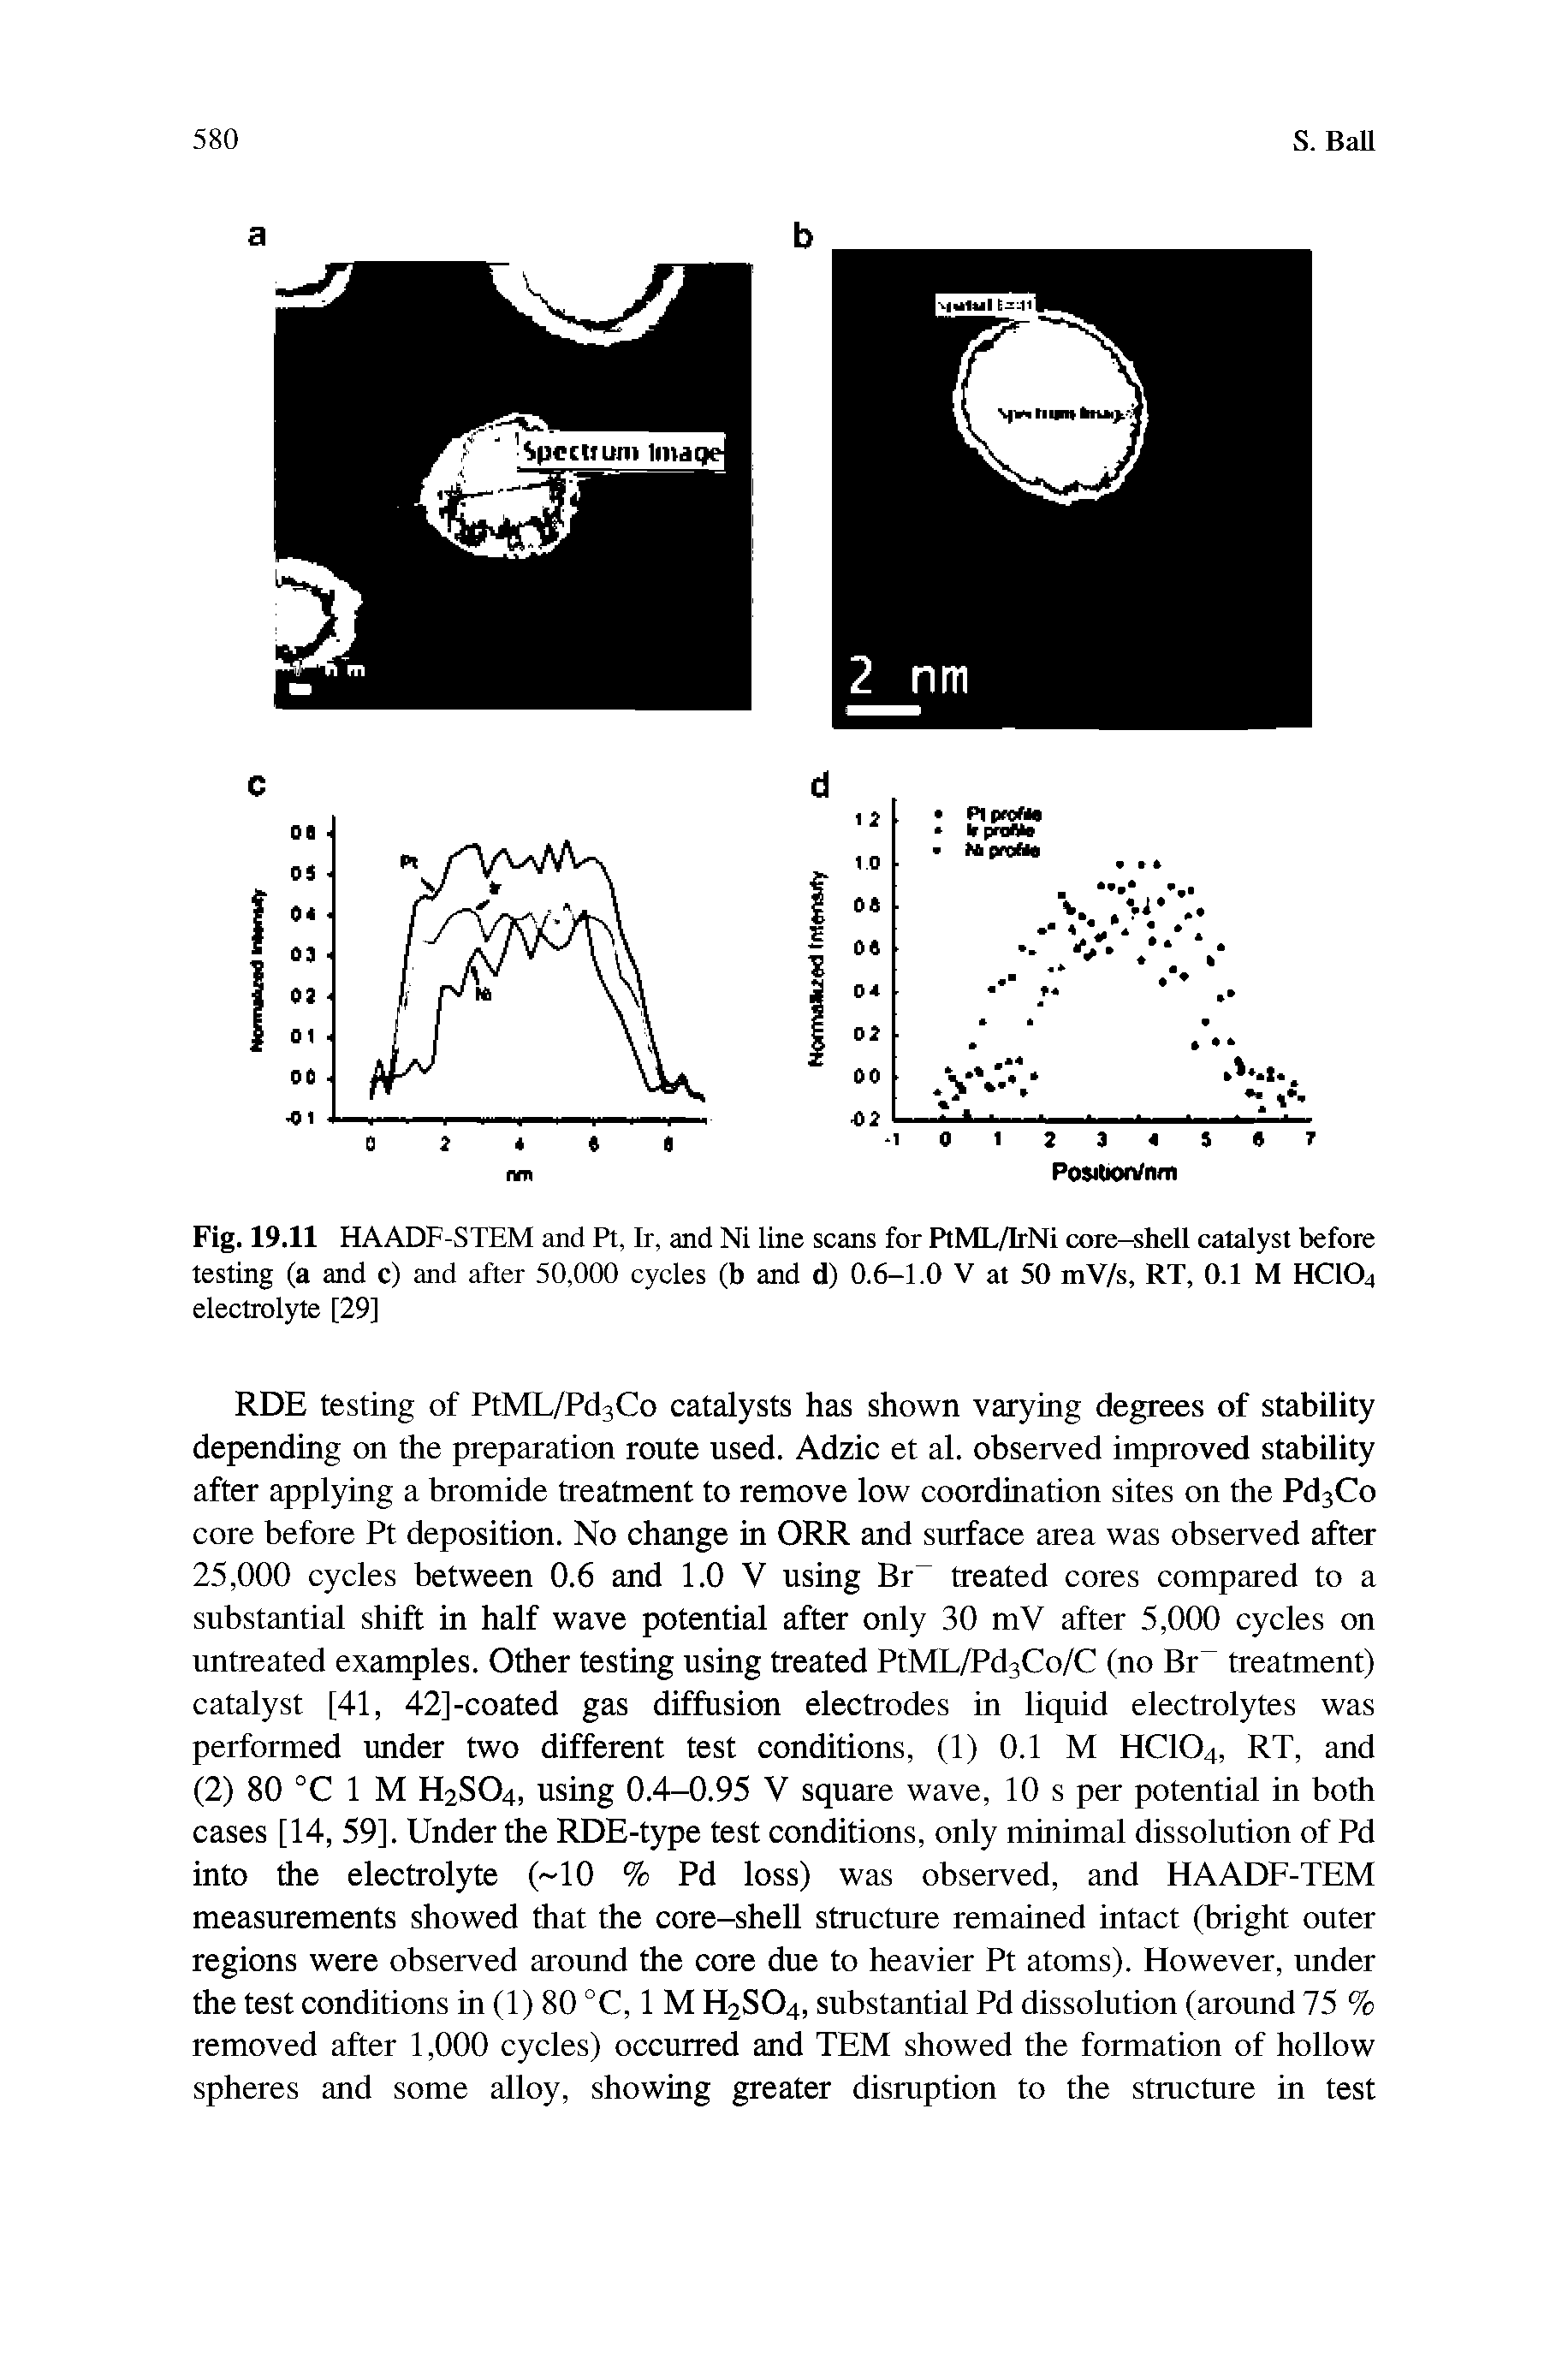 Fig. 19.11 HAADF-STEM and Pt, Ir, and Ni line scans for PtML/IrNi core-shell catalyst before testing (a and c) and after 50,000 cycles (b and d) 0.6-1.0 V at 50 mV/s, RT, 0.1 M HCIO4 electrolyte [29]...